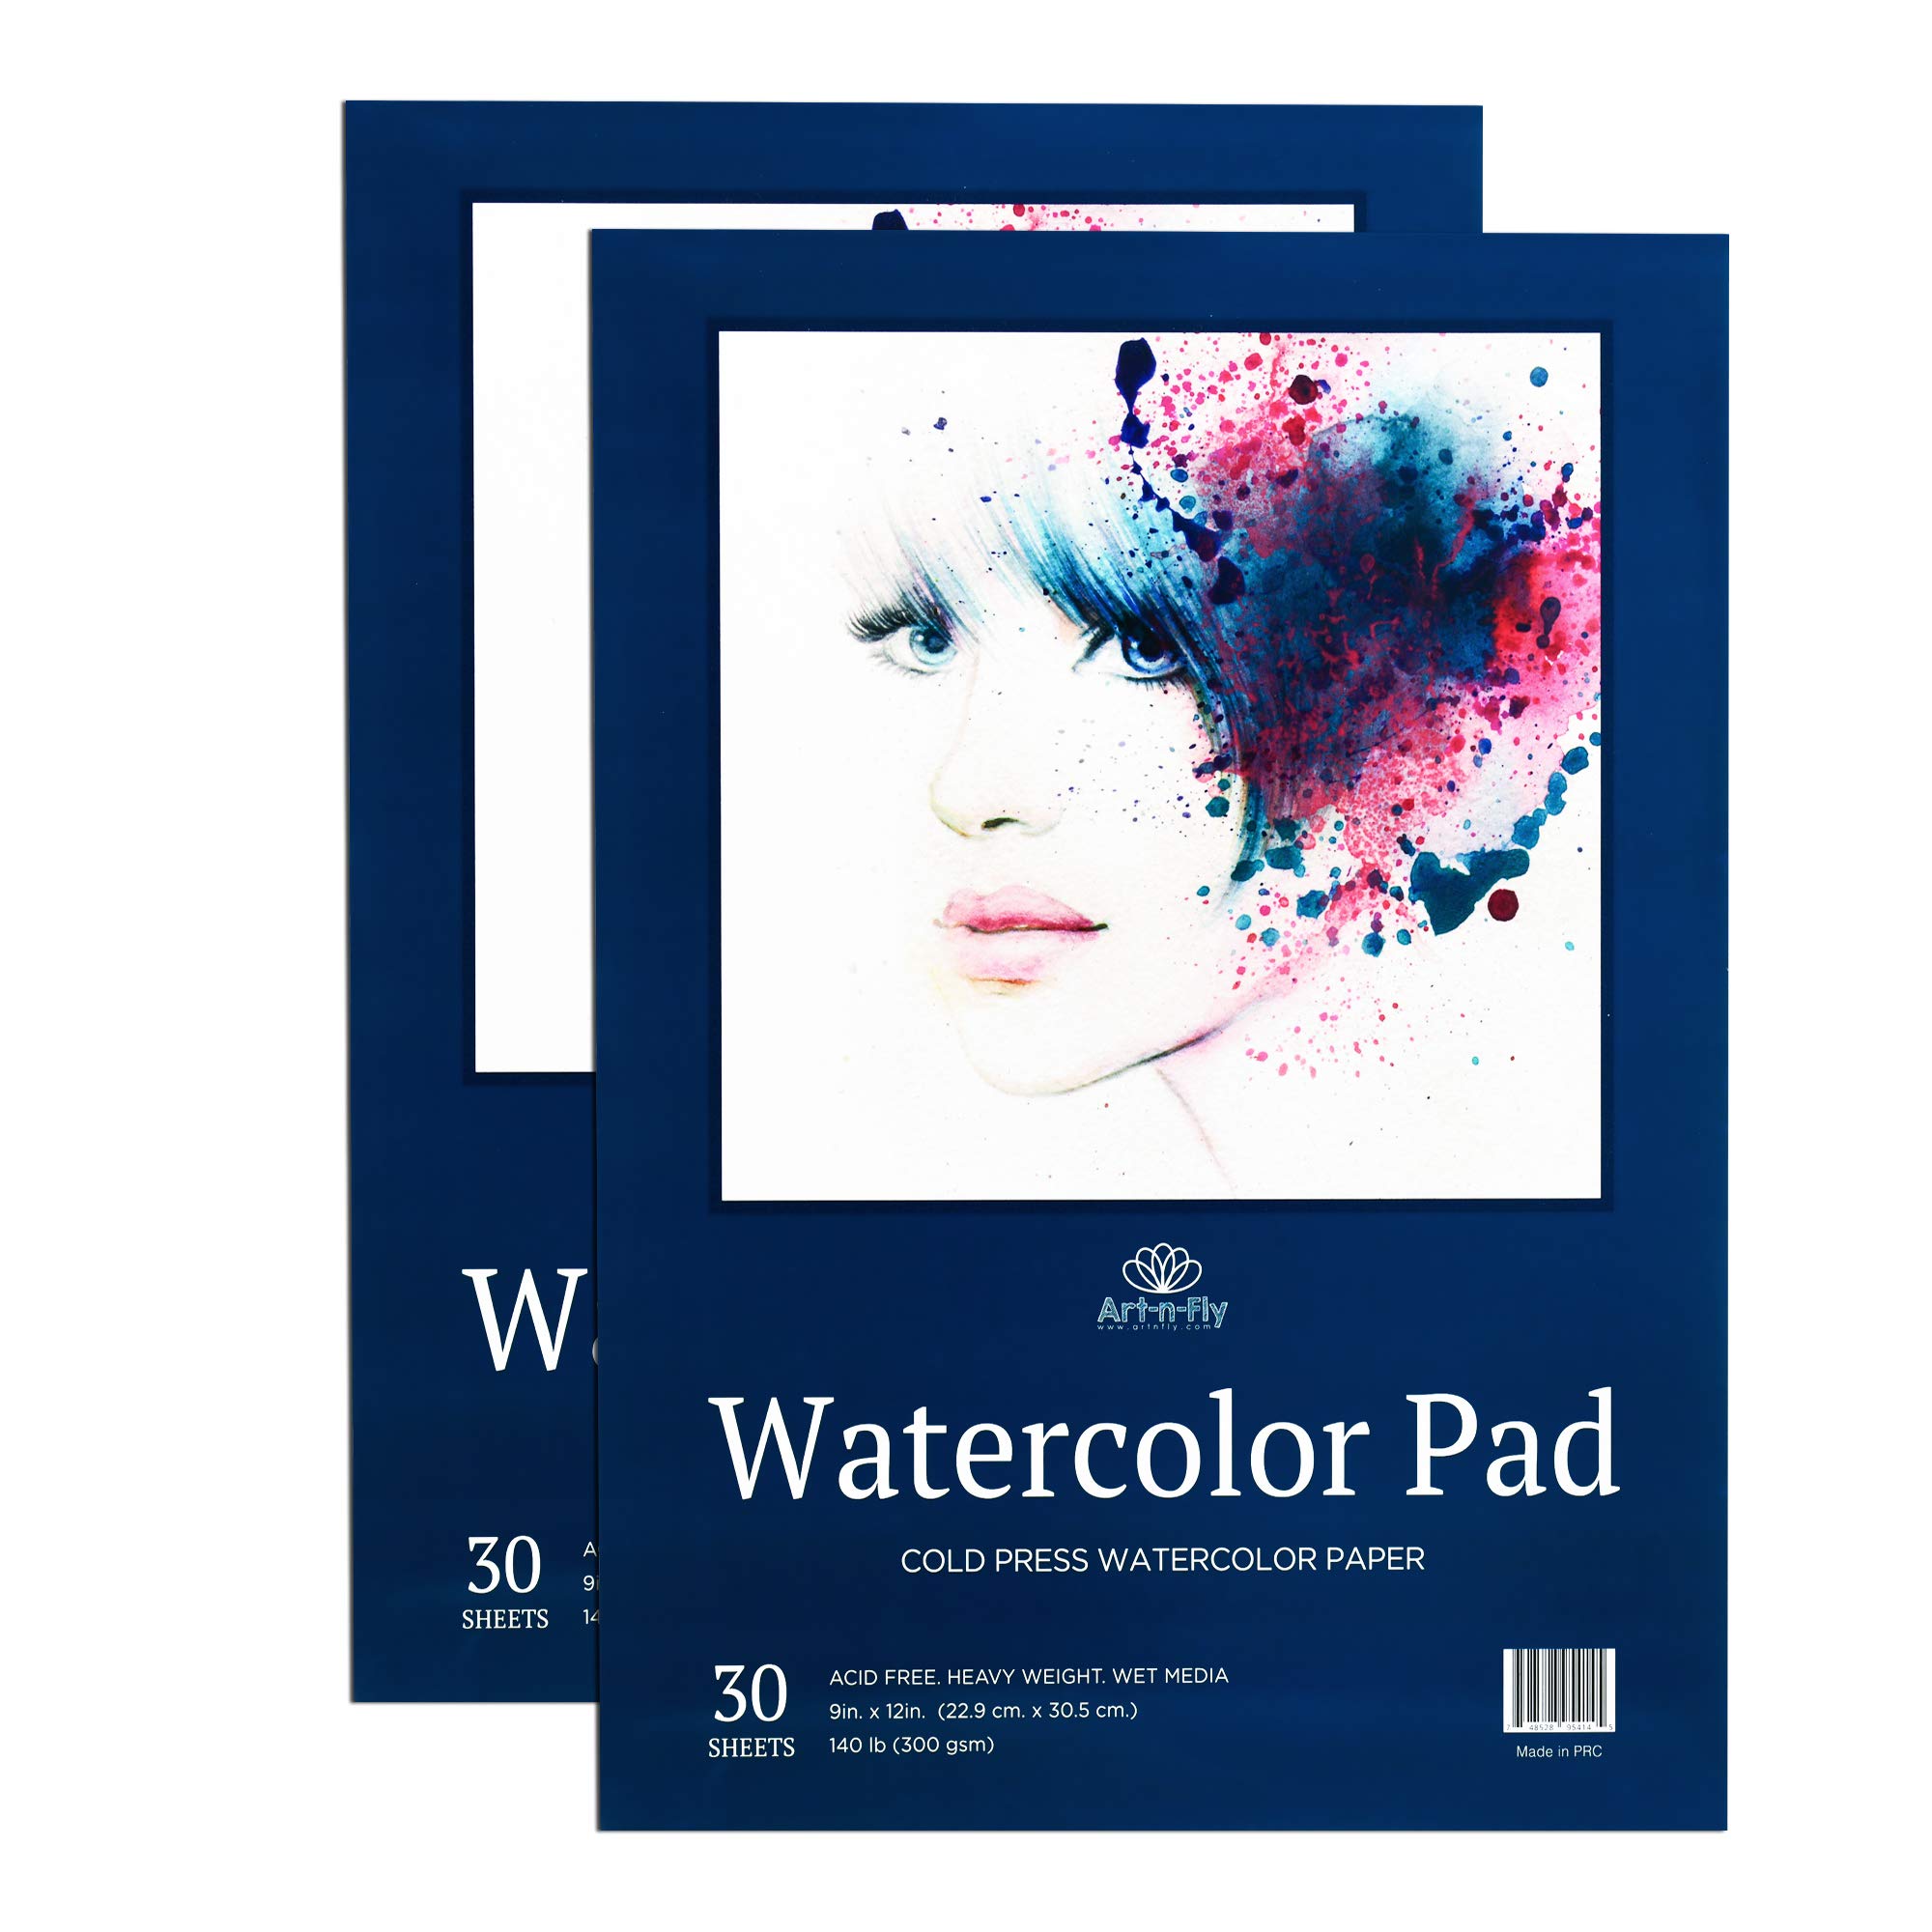 Art-N-Fly Watercolor Paper Pad 9x12 2 Pack - Cold Press Water